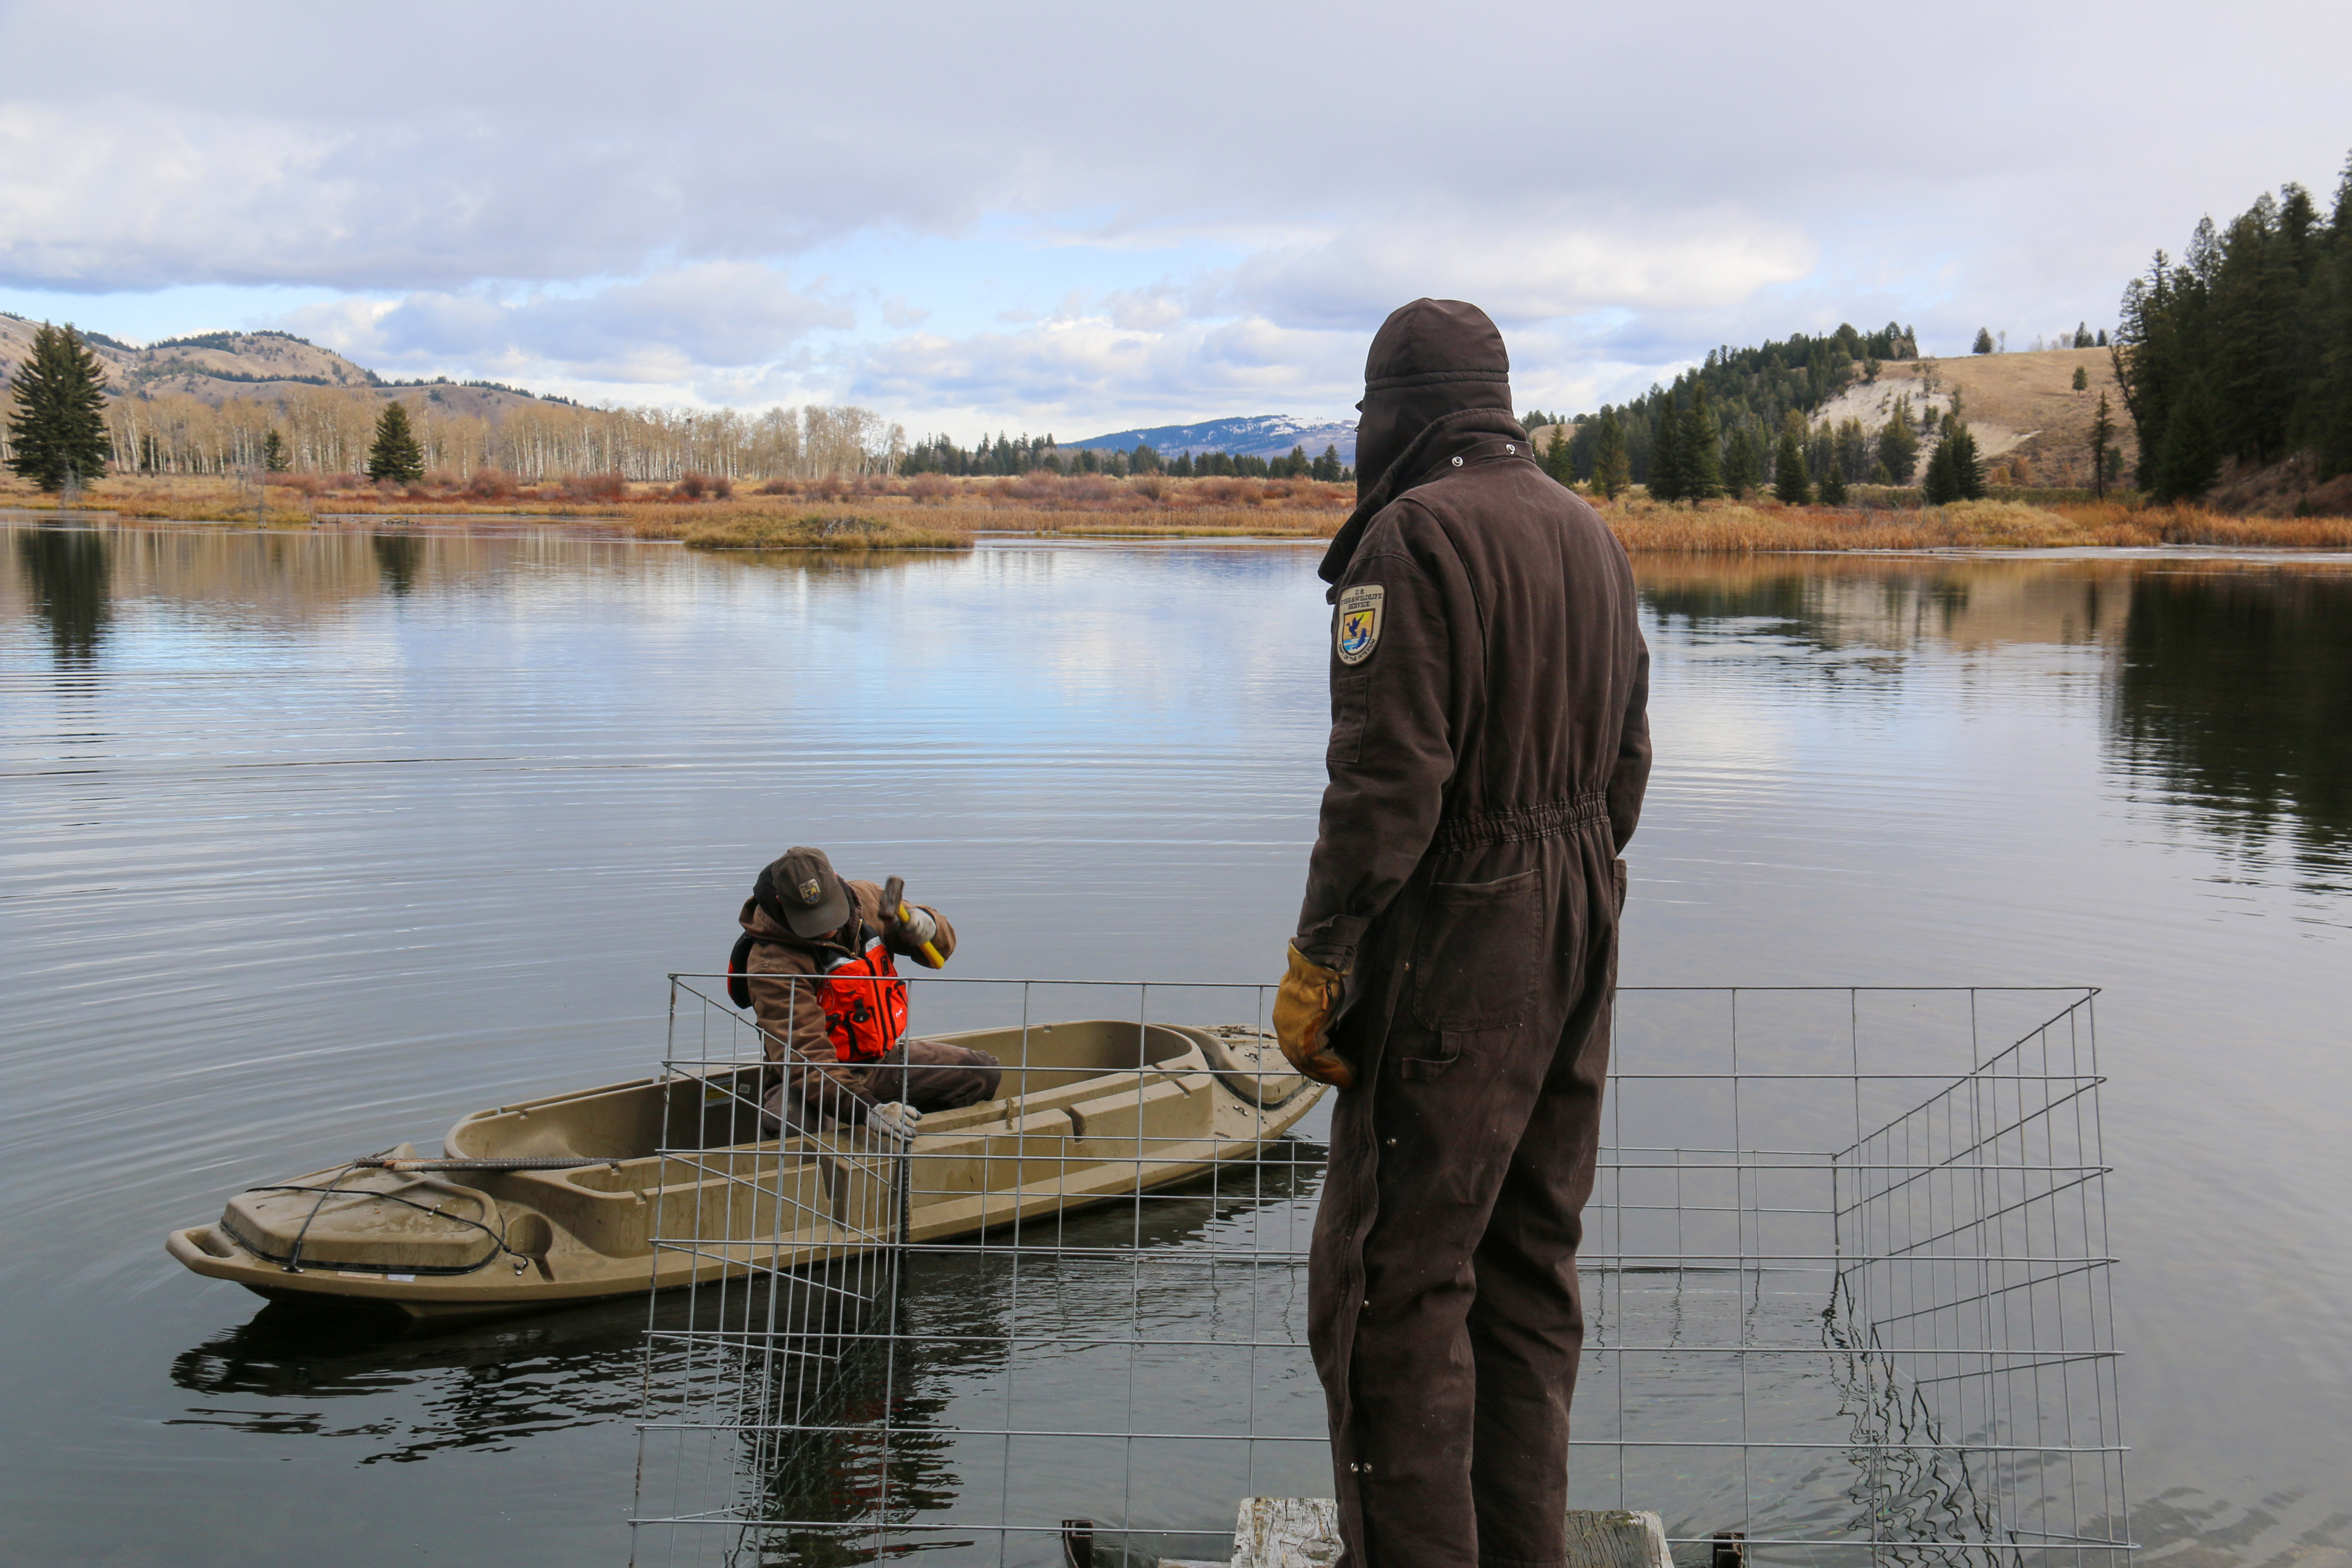 A biologist on a kayak in water installs a wire box while a USFWS employee watches from shore.